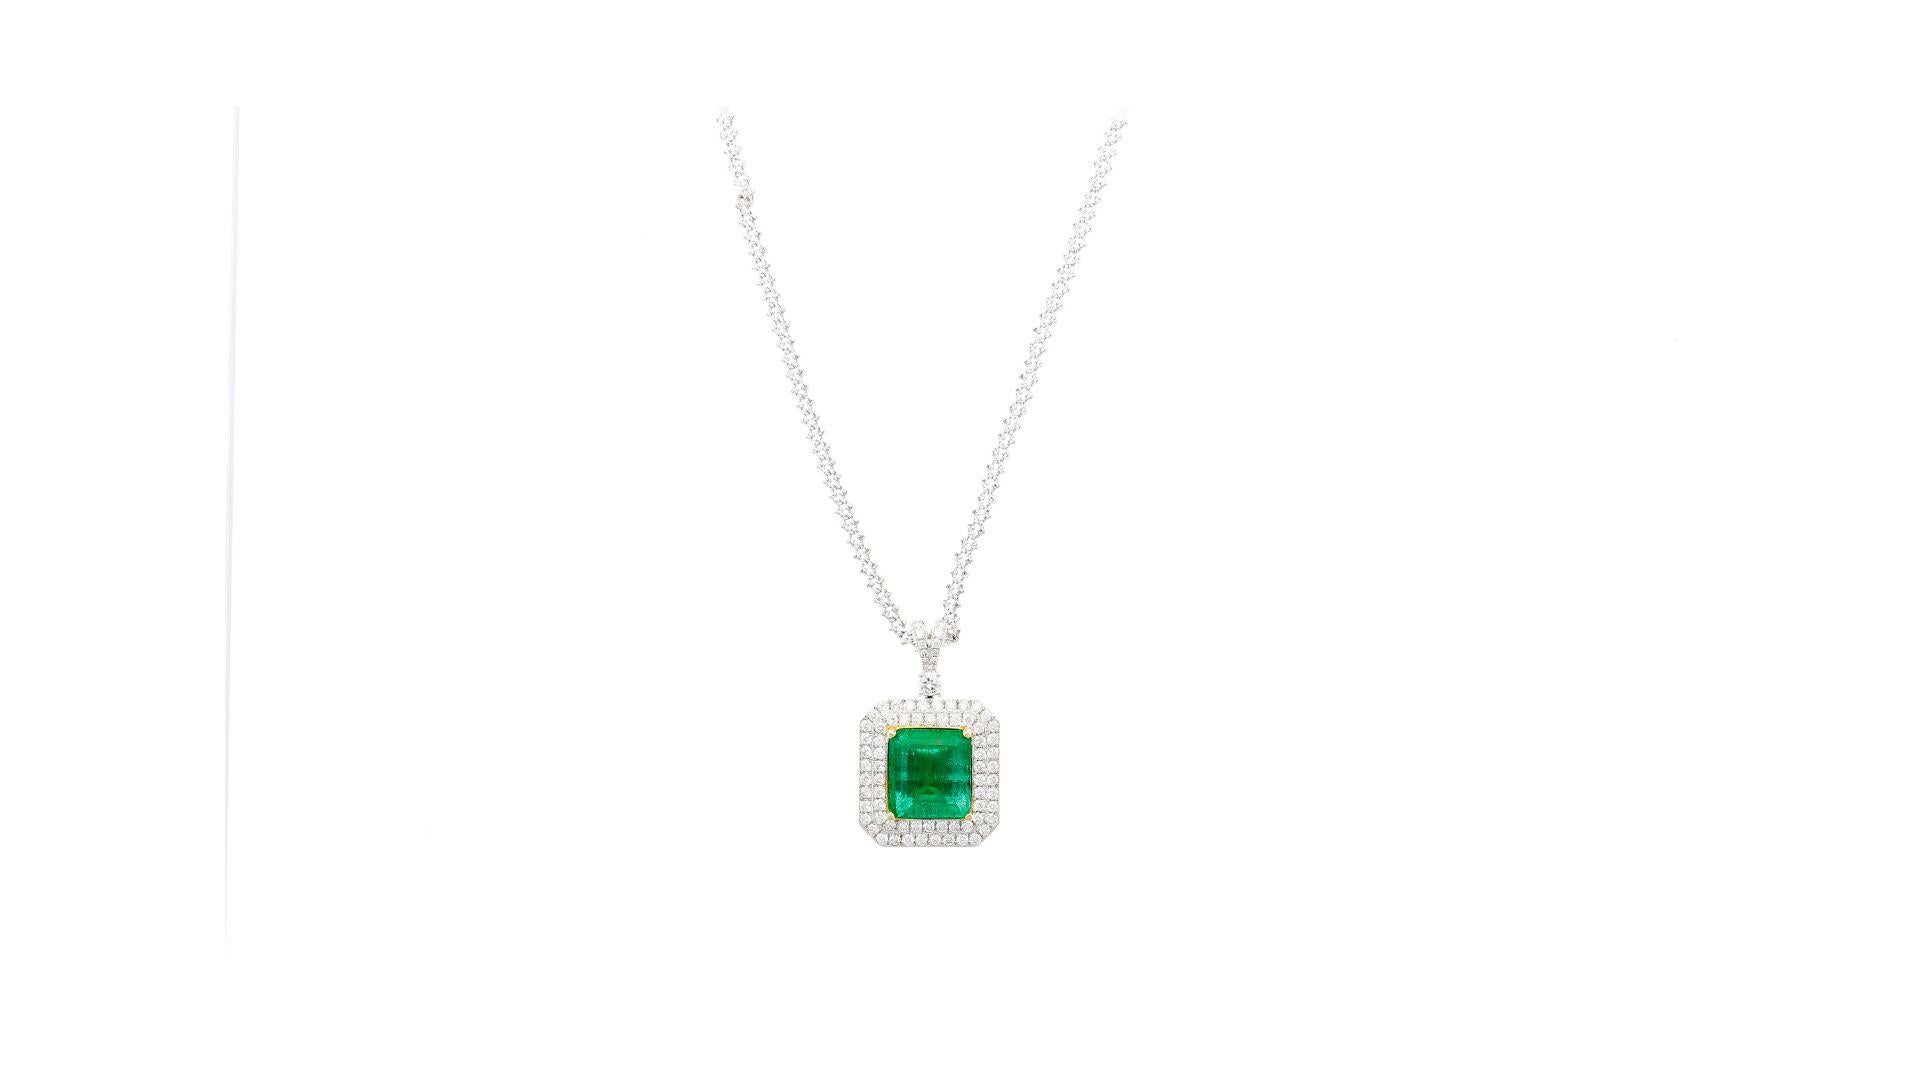 Emerald Cut GIA Certified 6.33 Carat Minor Oil Colombian Emerald Necklace in 18K White Gold For Sale